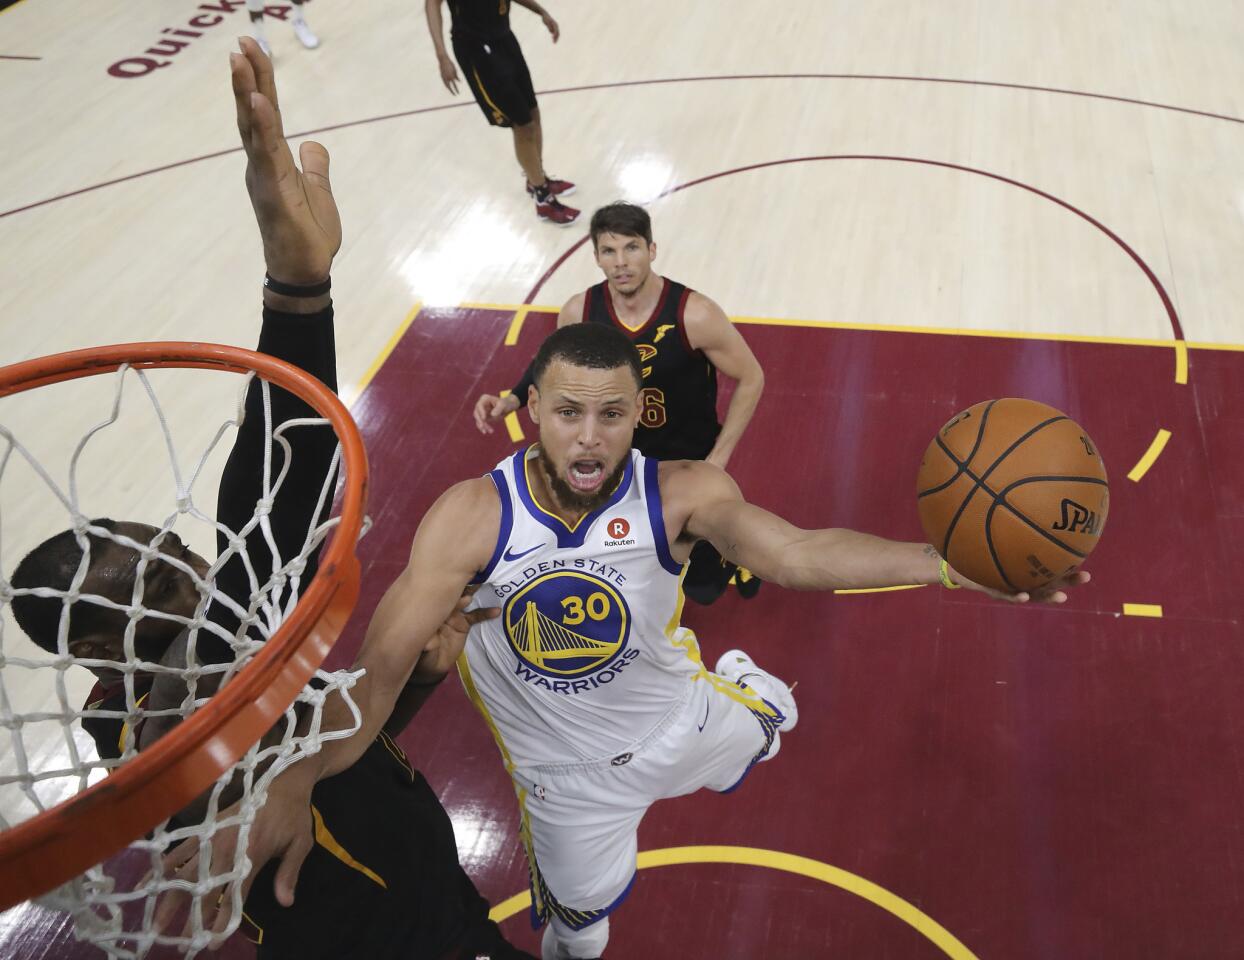 Golden State Warriors' Stephen Curry shoots against Cleveland Cavaliers' LeBron James during the second half of Game 4 of basketball's NBA Finals, Friday, June 8, 2018, in Cleveland. The Warriors defeated the Cavaliers 108-85. (Kyle Terada/Pool Photo via AP)